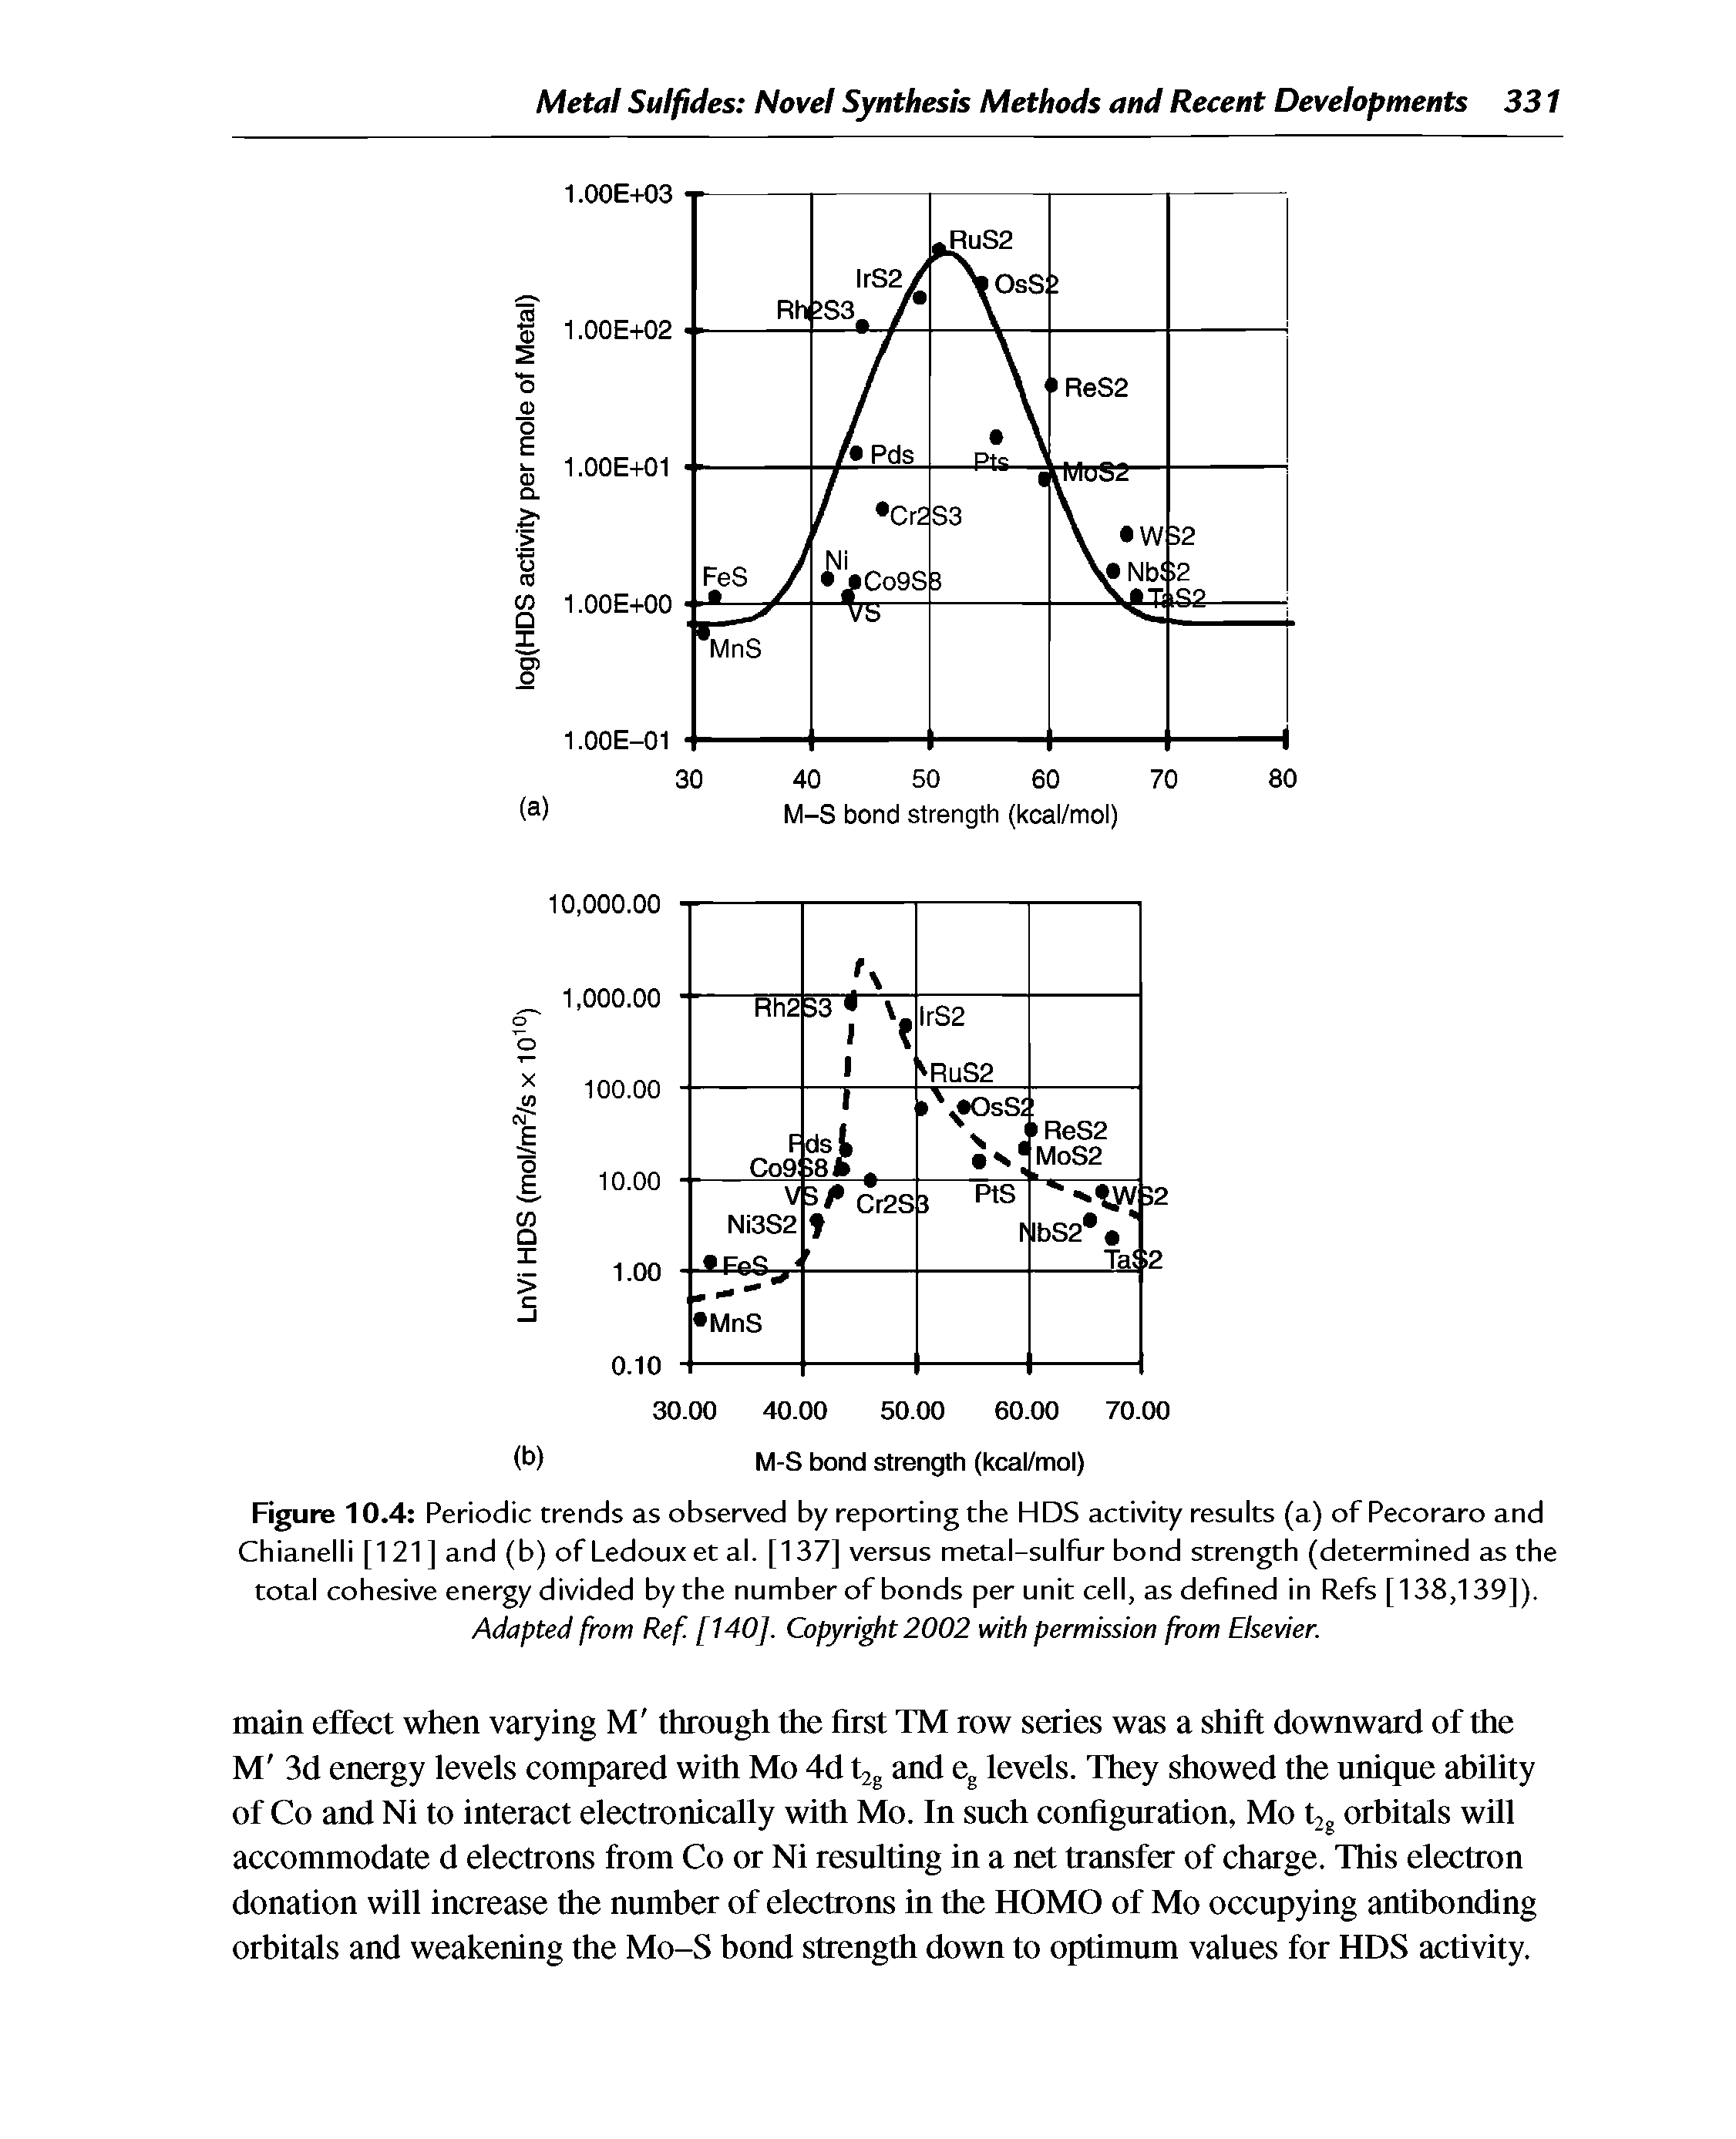 Figure 10.4 Periodic trends as observed by reporting the HDS activity results (a) of Pecoraro and Chianelli [121] and (b) ofLedouxet al. [137] versus metal-sulfur bond strength (determined as the total cohesive energy divided by the number of bonds per unit cell, as defined in Refs [138,139]). Adapted from Ref [140], Copyright 2002 with permission from Elsevier.